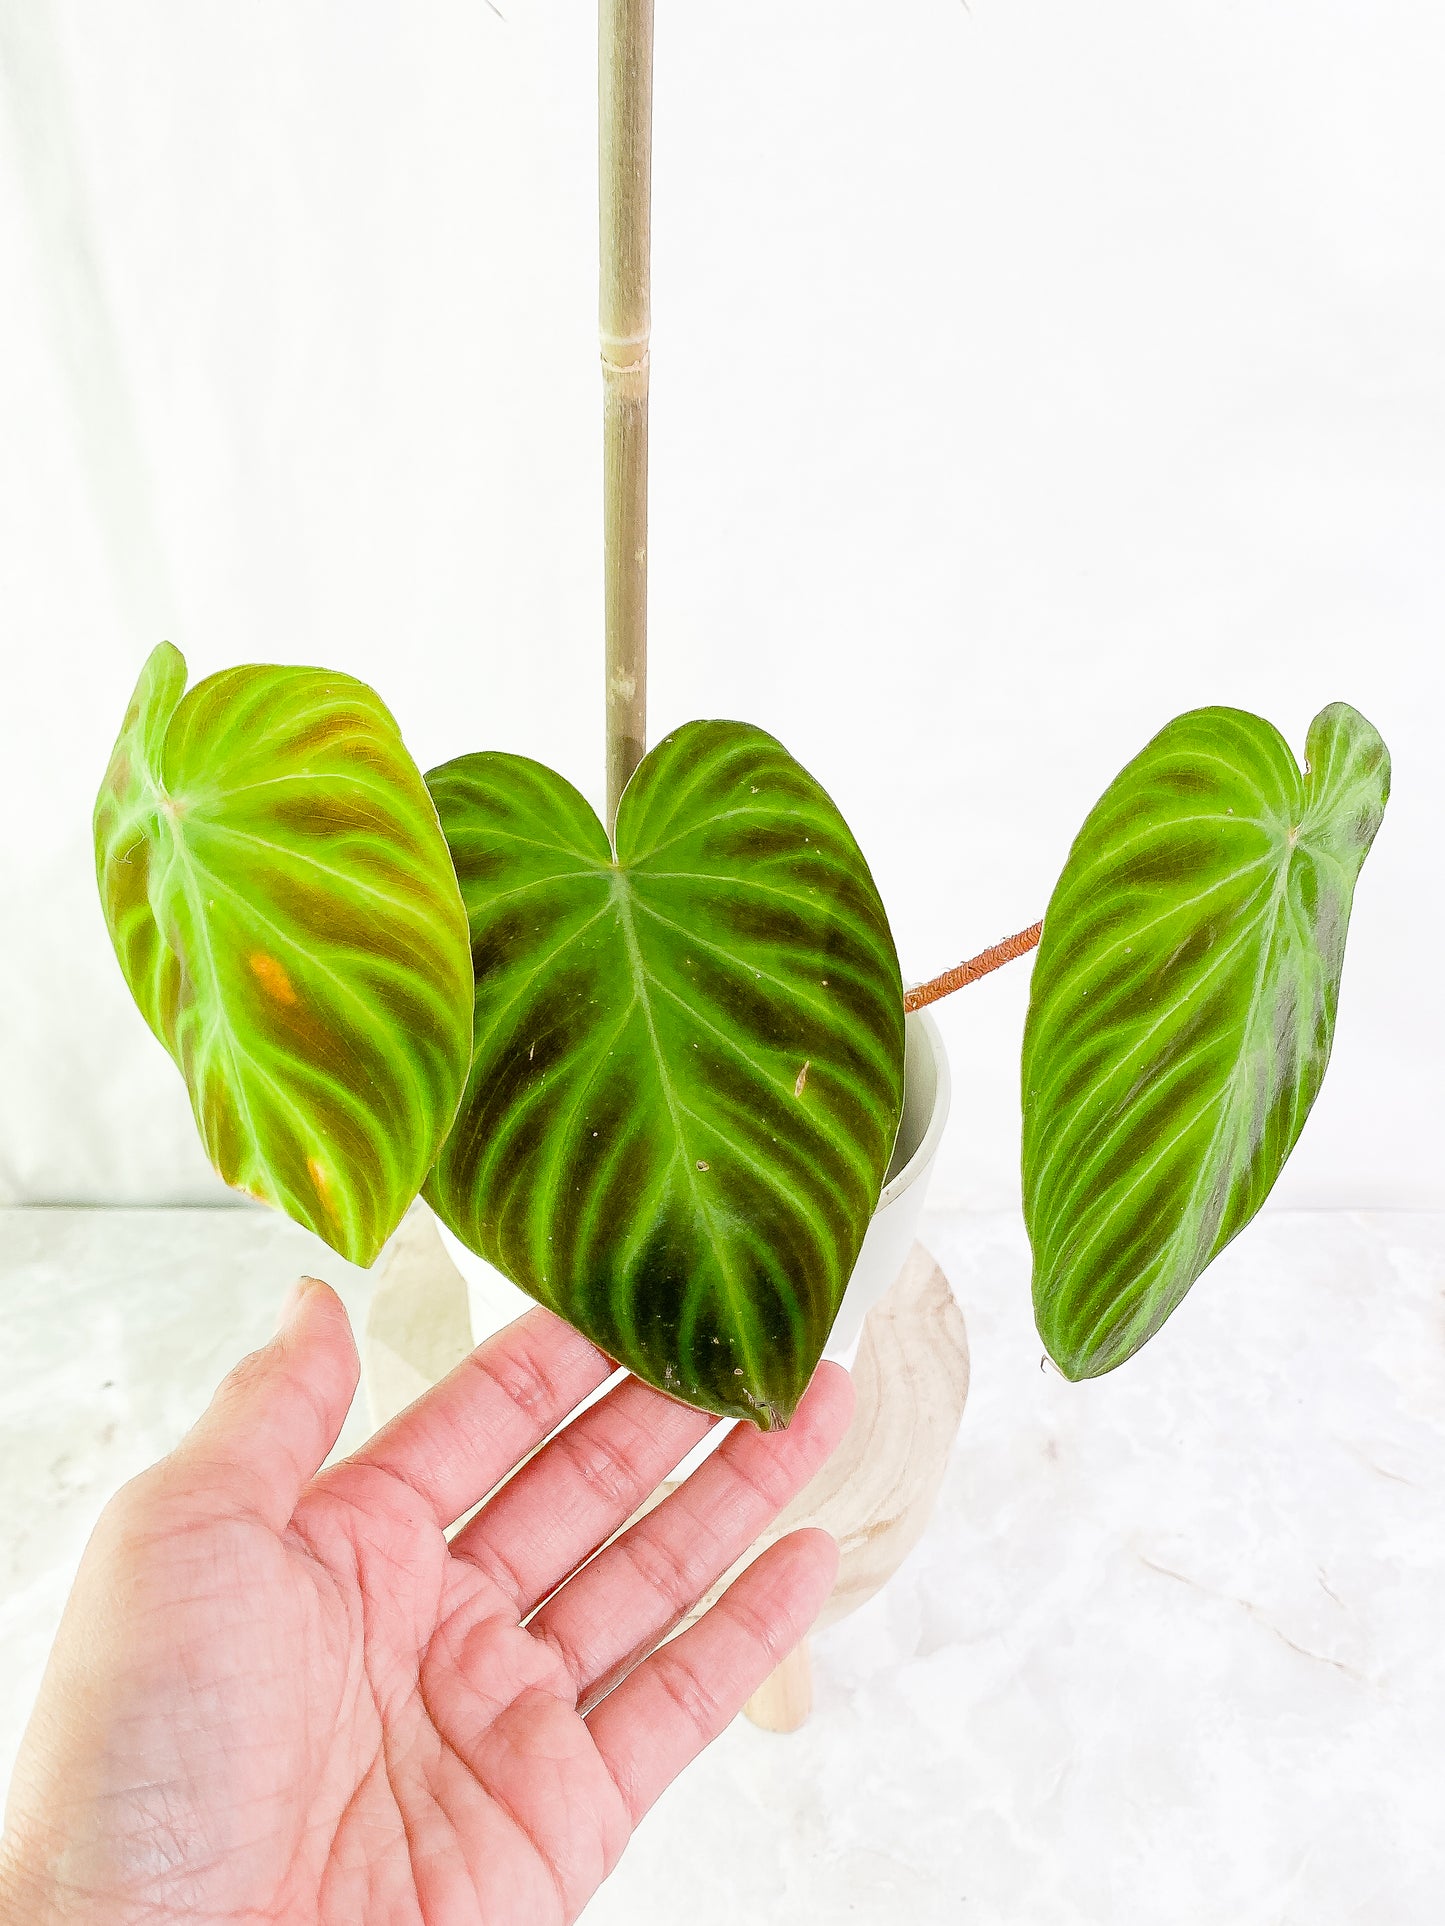 Philodendron Verrucosum glow small node with 1 sprout slightly rooted